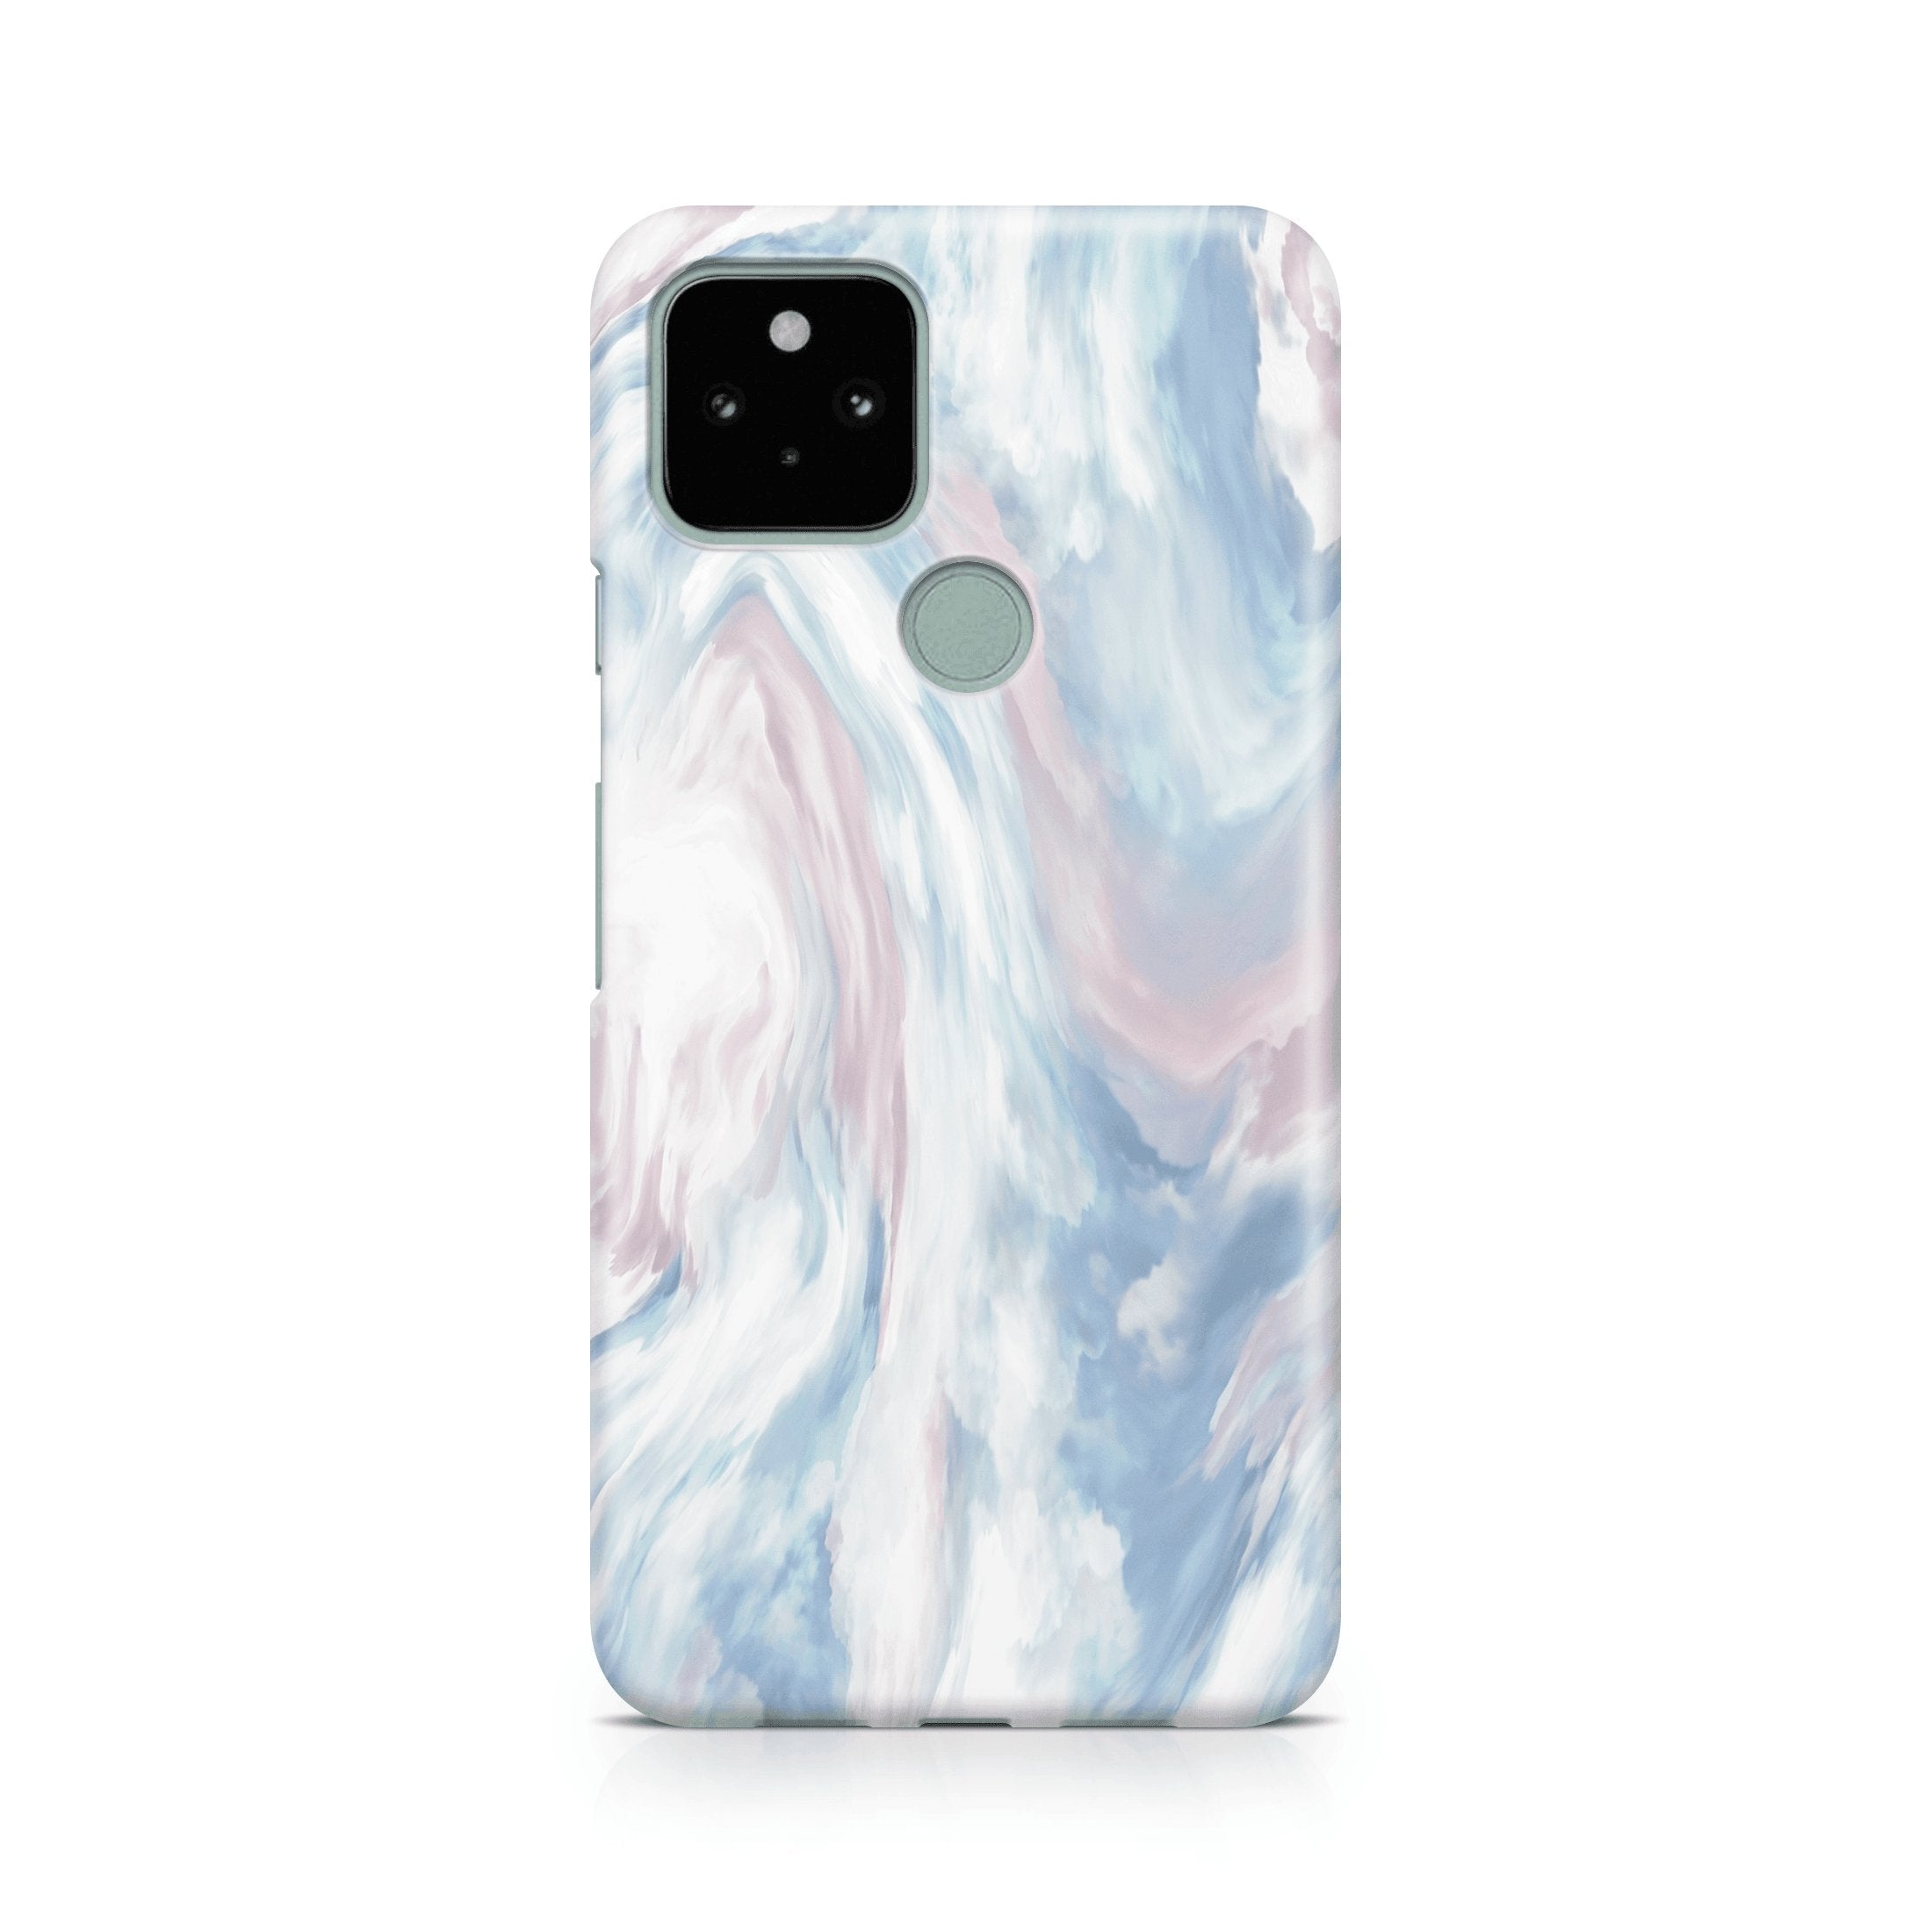 Winter Water - Google phone case designs by CaseSwagger